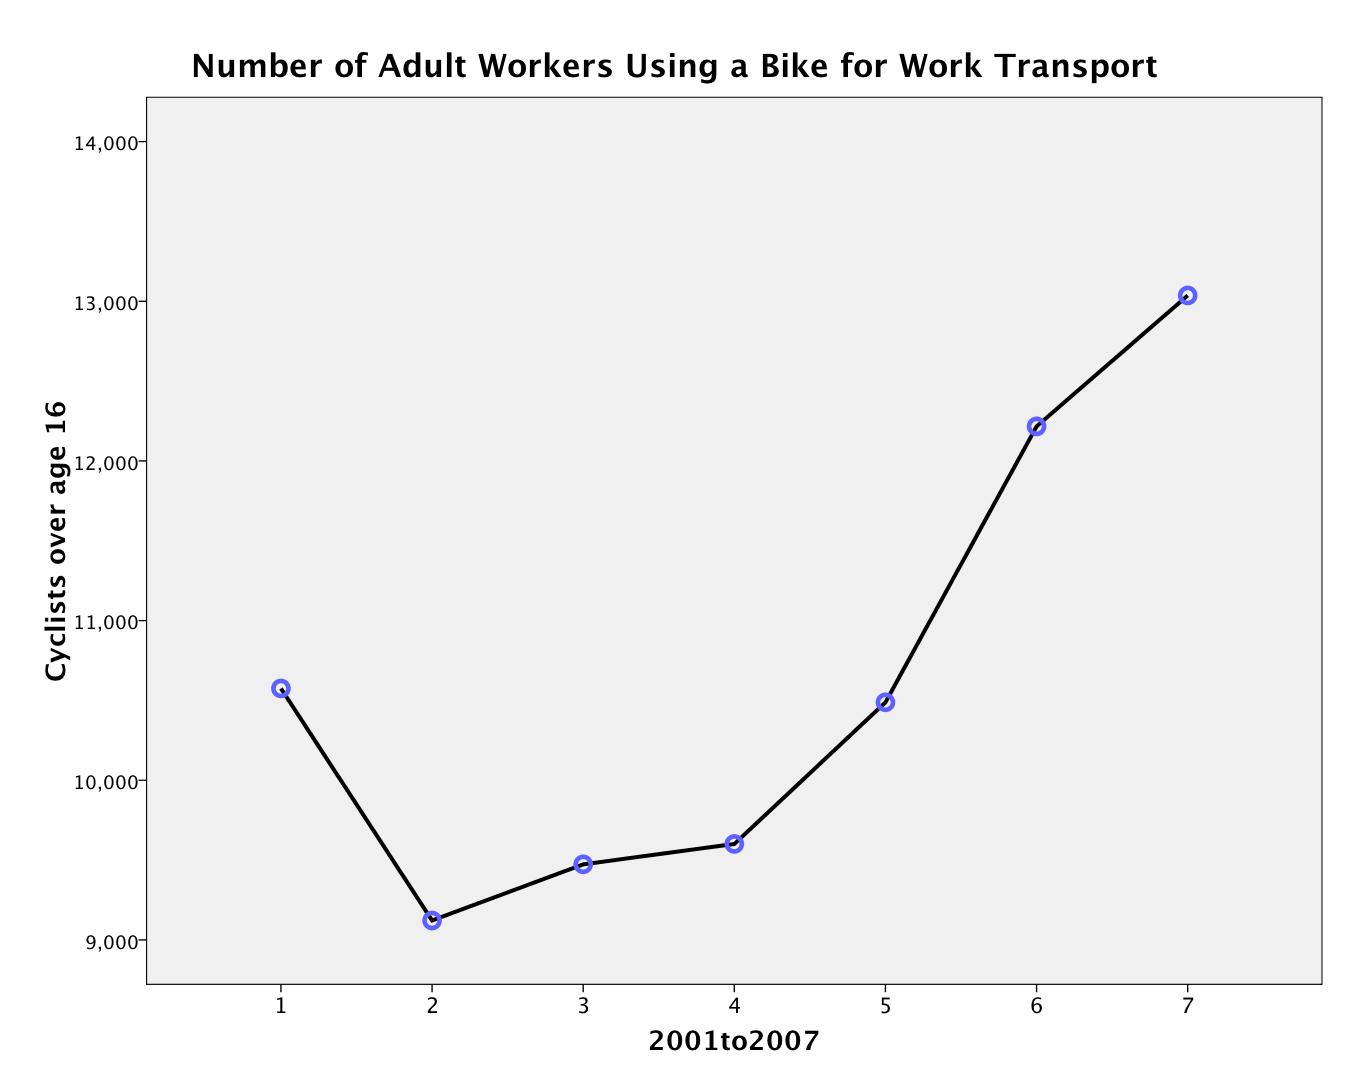 Bicycle as Primary Work Transport